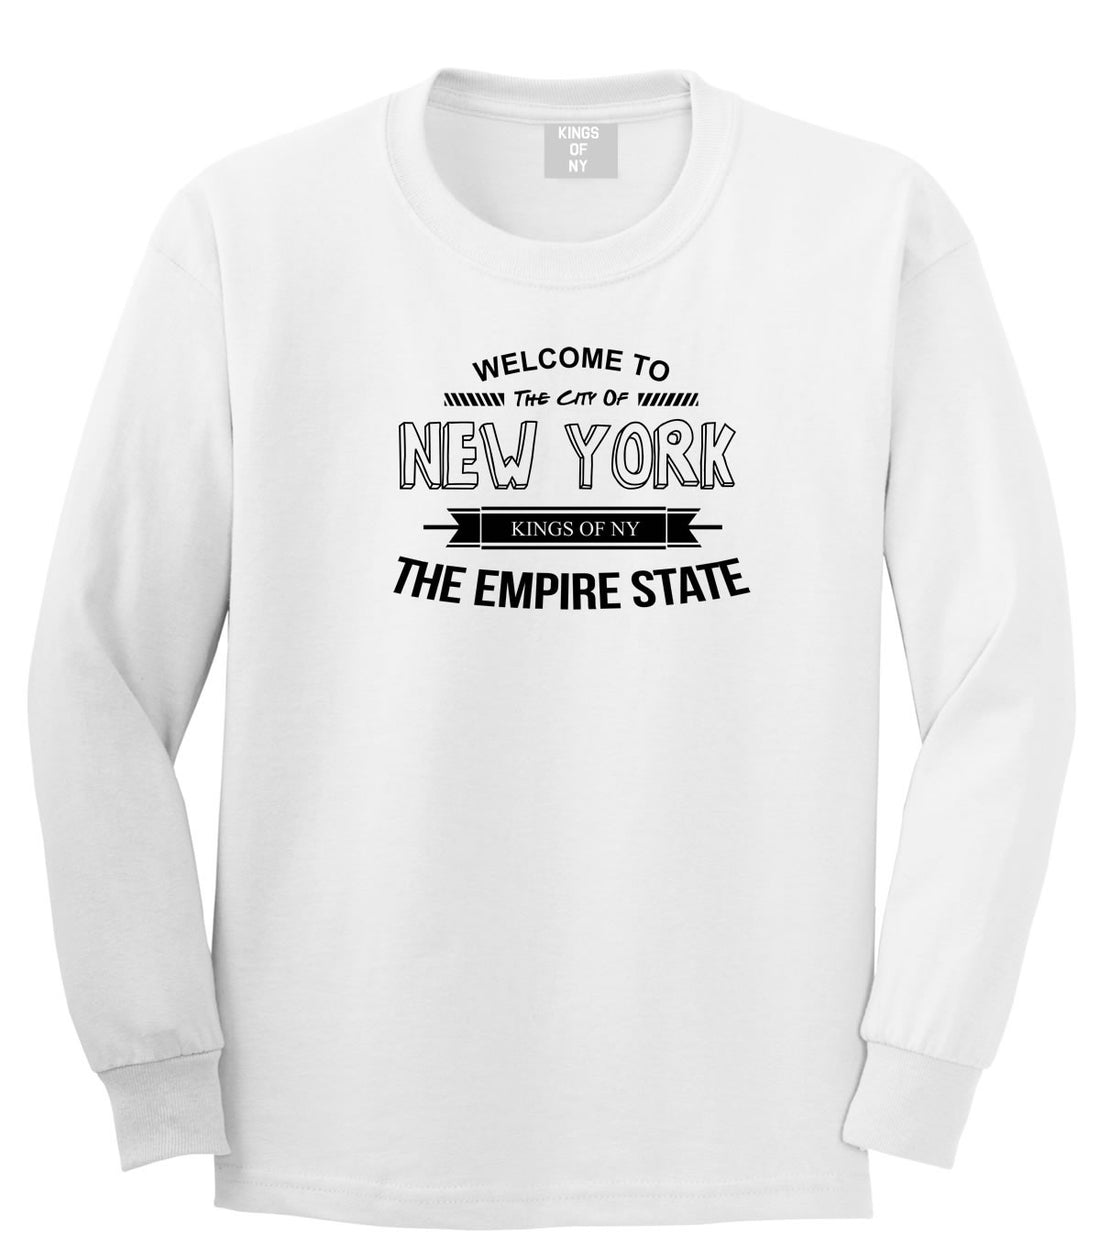 Empire State New York Long Sleeve T-Shirt in White by Kings Of NY